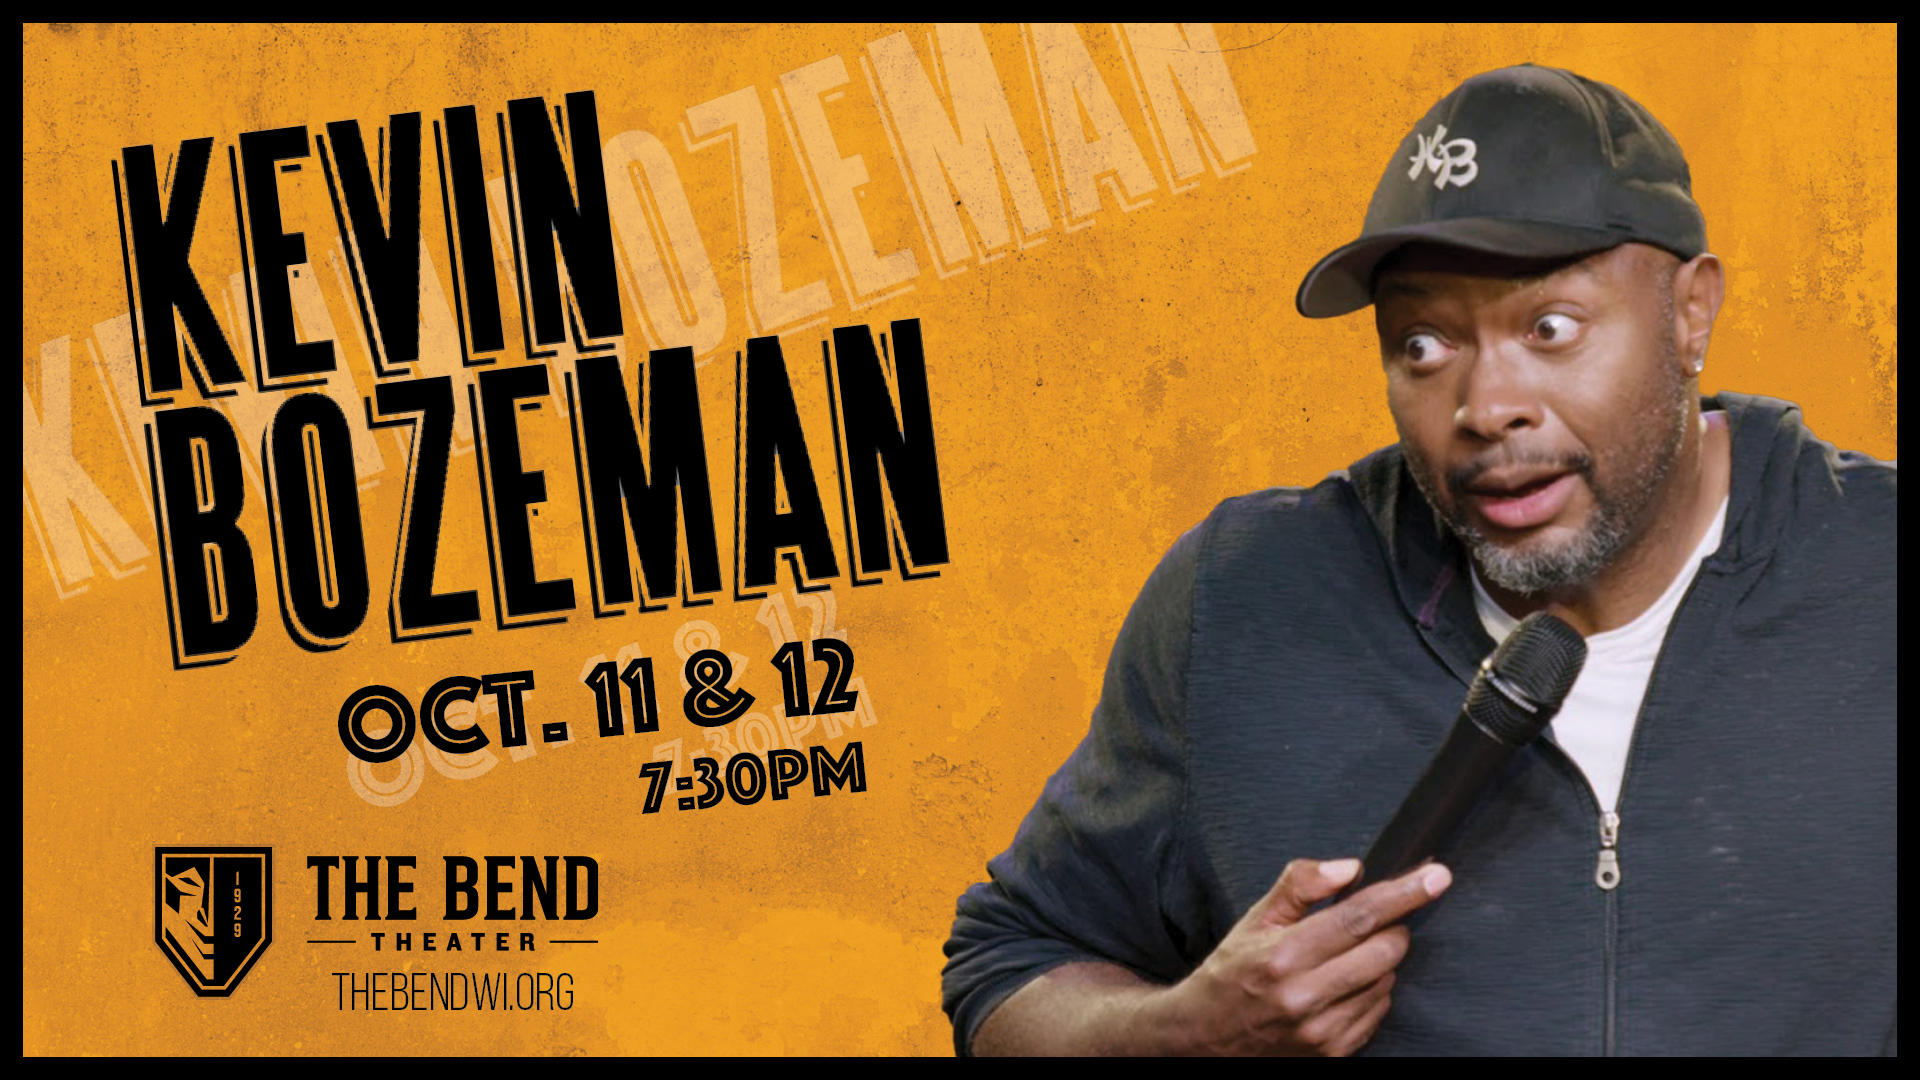 Laughter comes to The Bend Theater with Kevin Bozeman